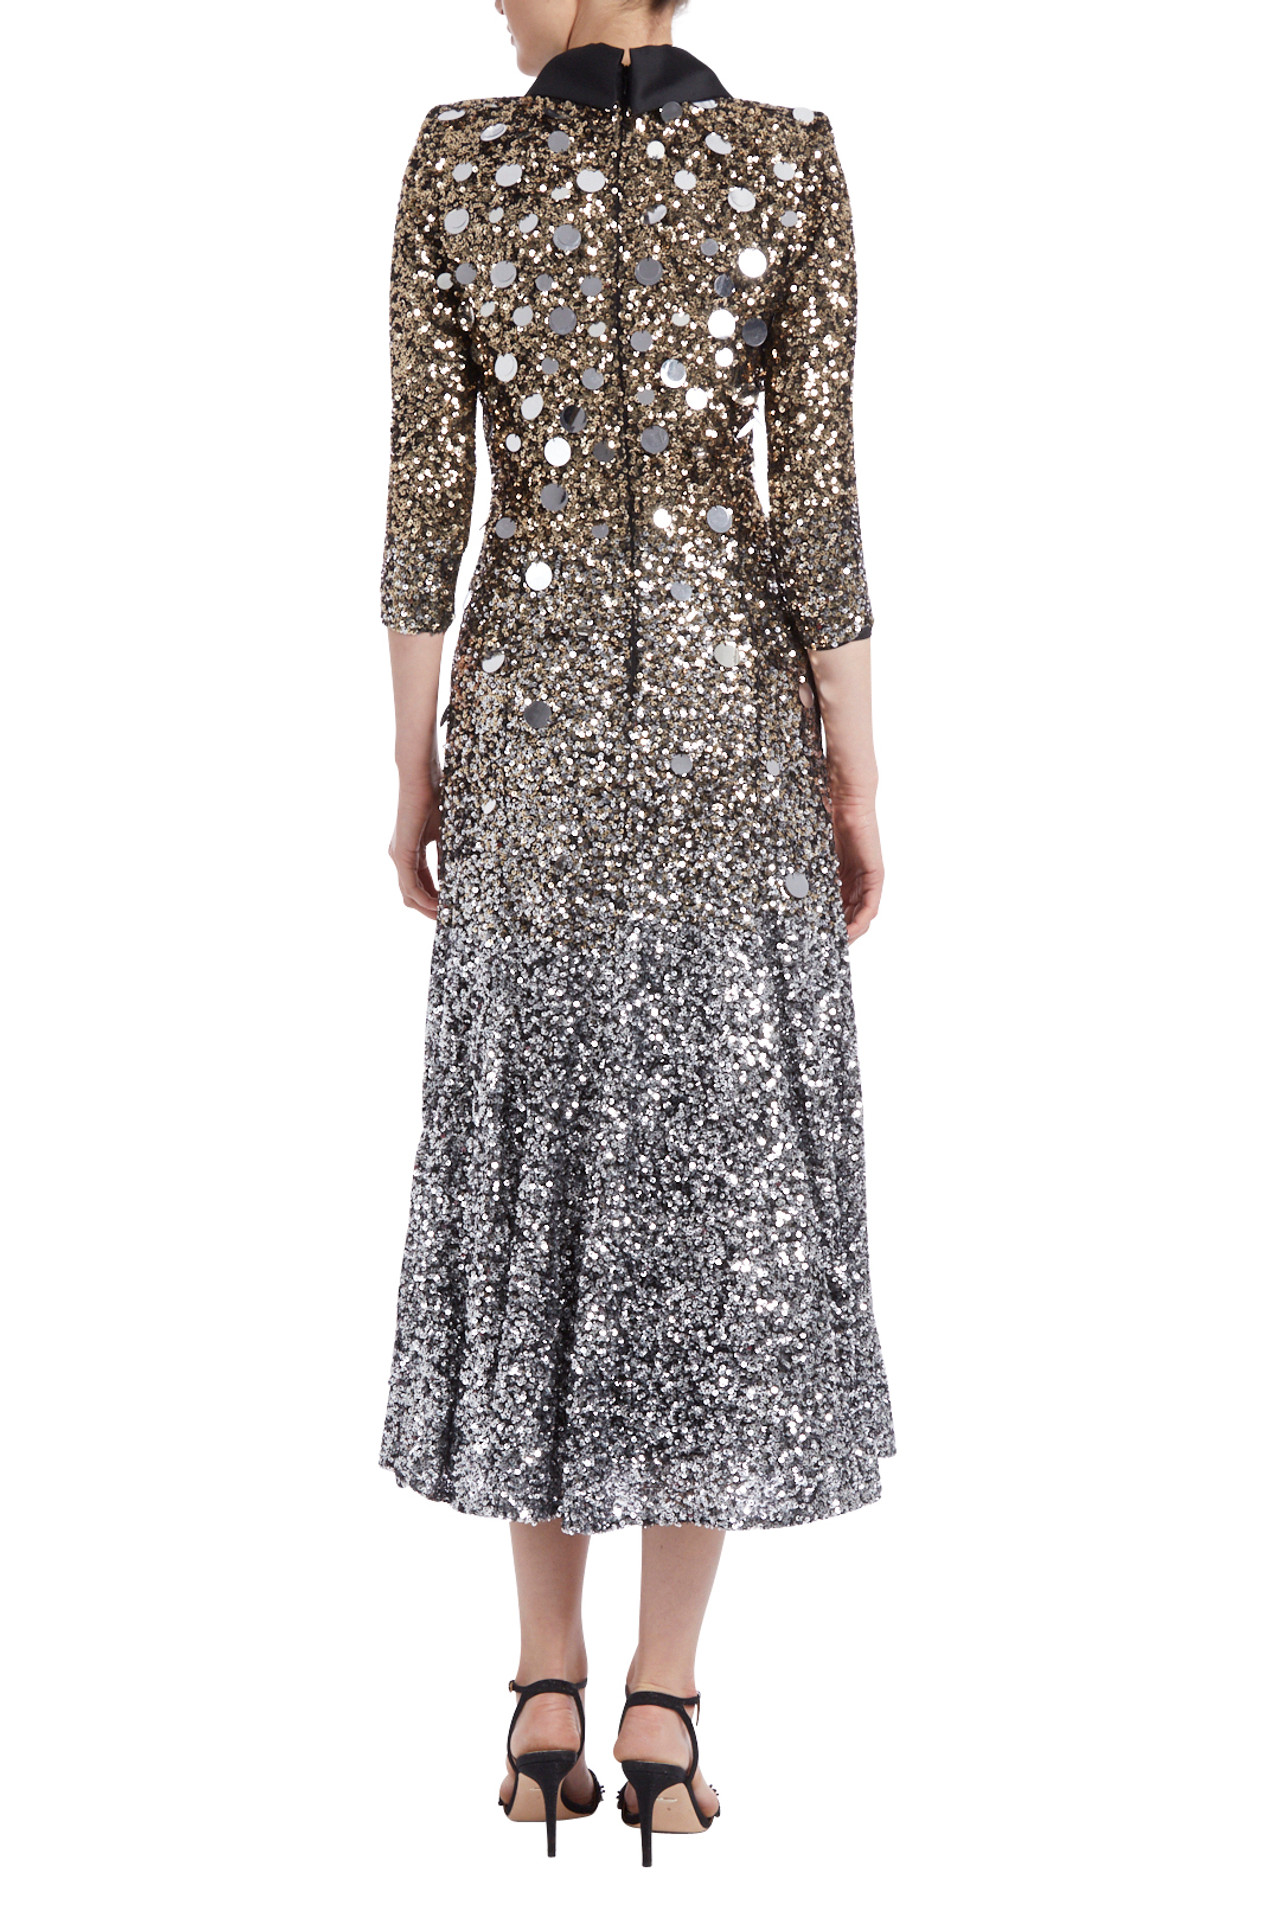 Gold and Silver Sequin Collared Dress by Badgley Mishcka